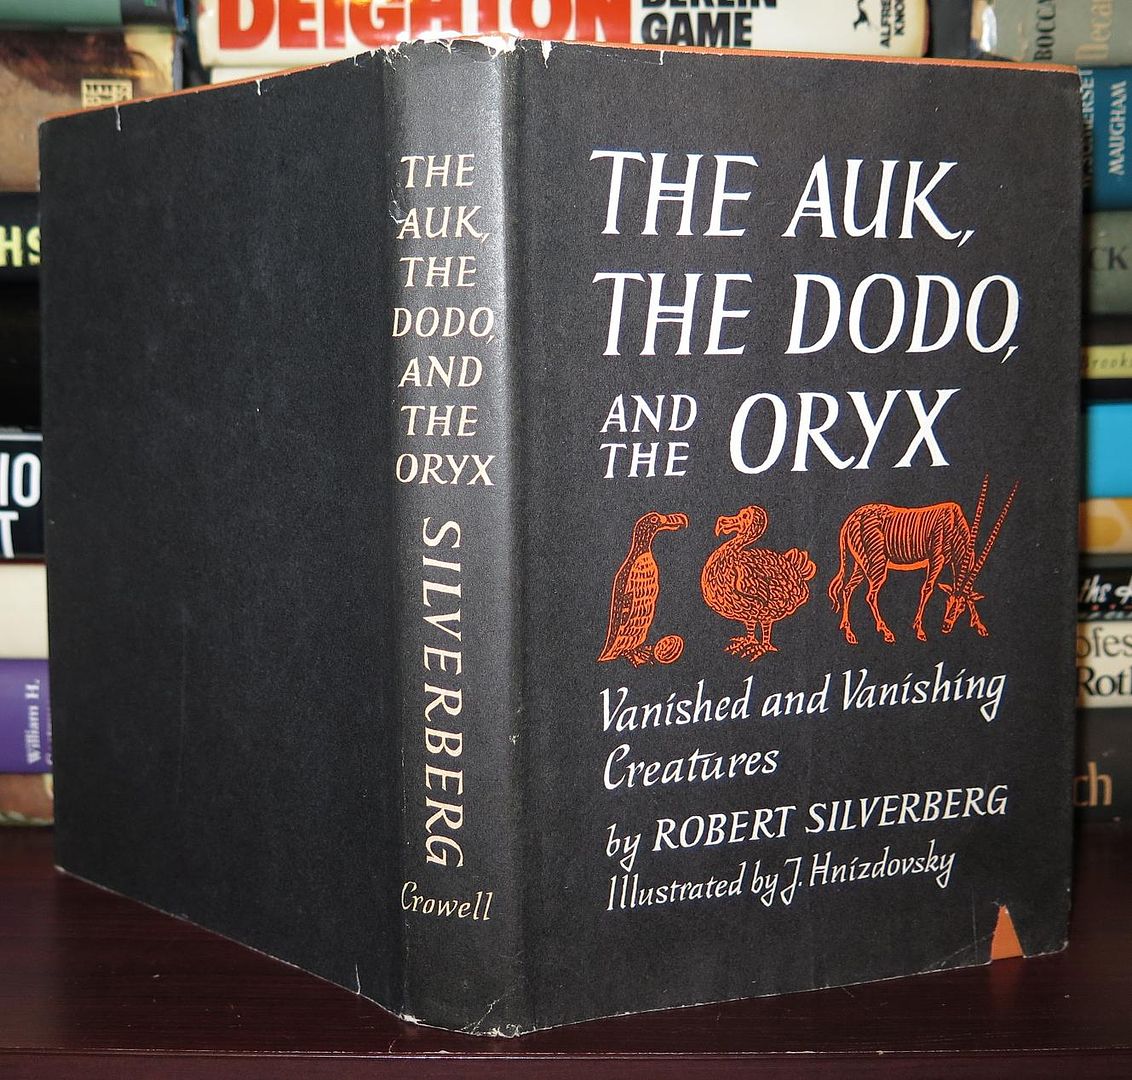 SILVERBERG, ROBERT - The Auk, the Dodo, and the Oryx